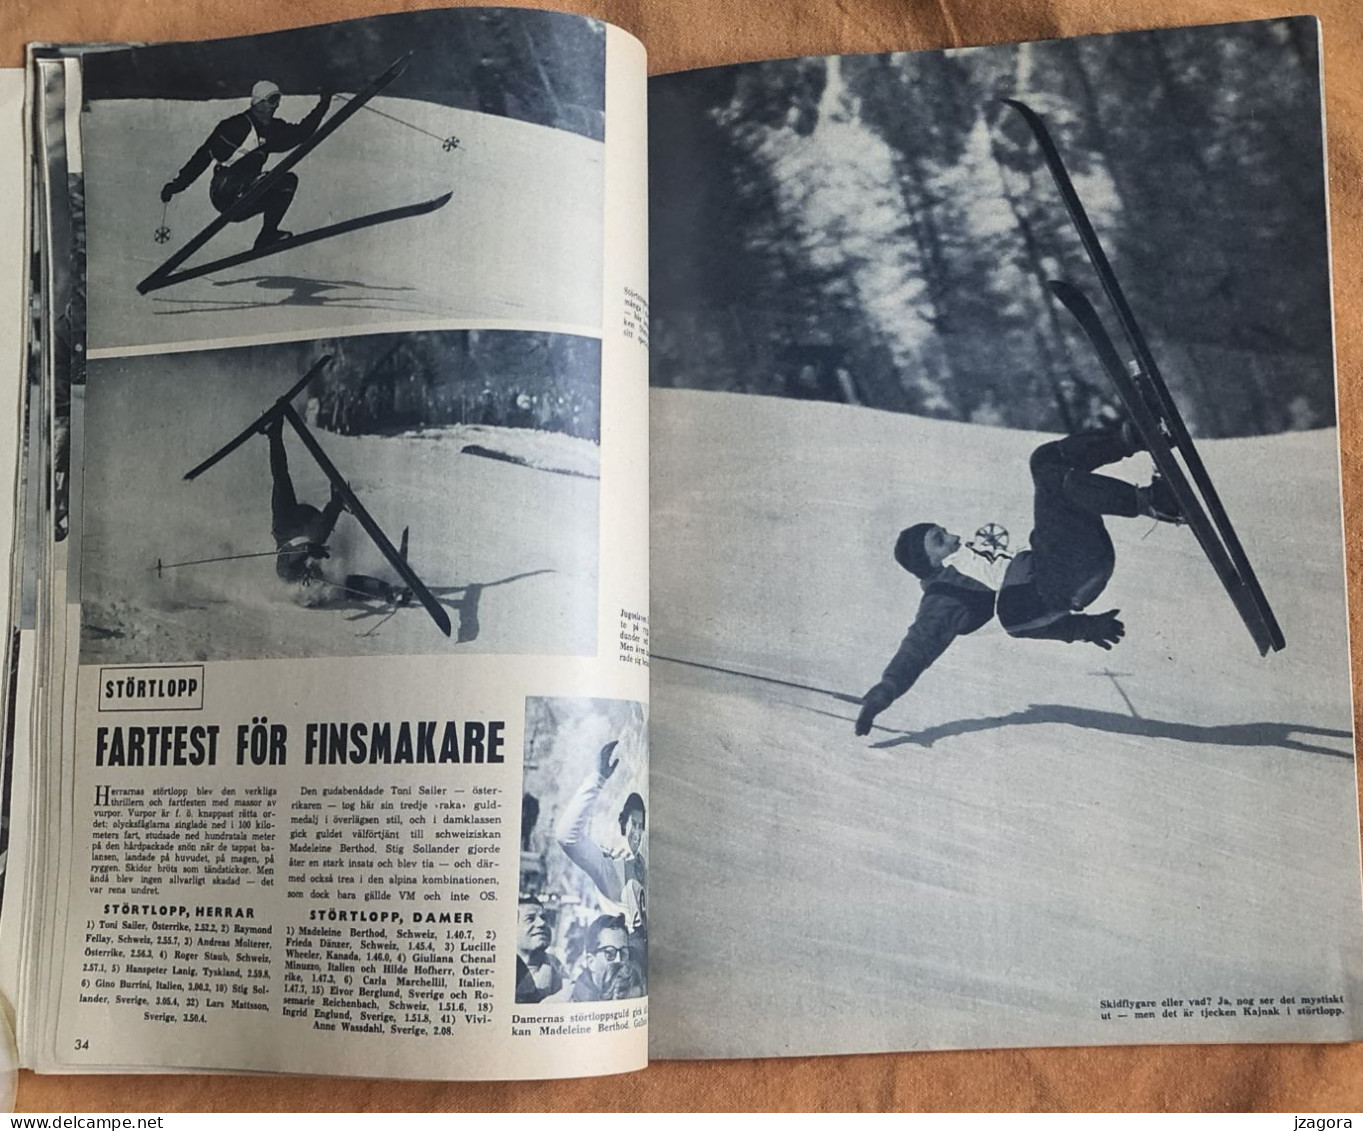 WINTER OLYMPIC GAMES OLYMPISCHE WINTERSPIELE JEUX OLYMPIQUES D'HIVER JUEGOS OLÍMPICOS DE INVIERNO 1956 CORTINA - Books